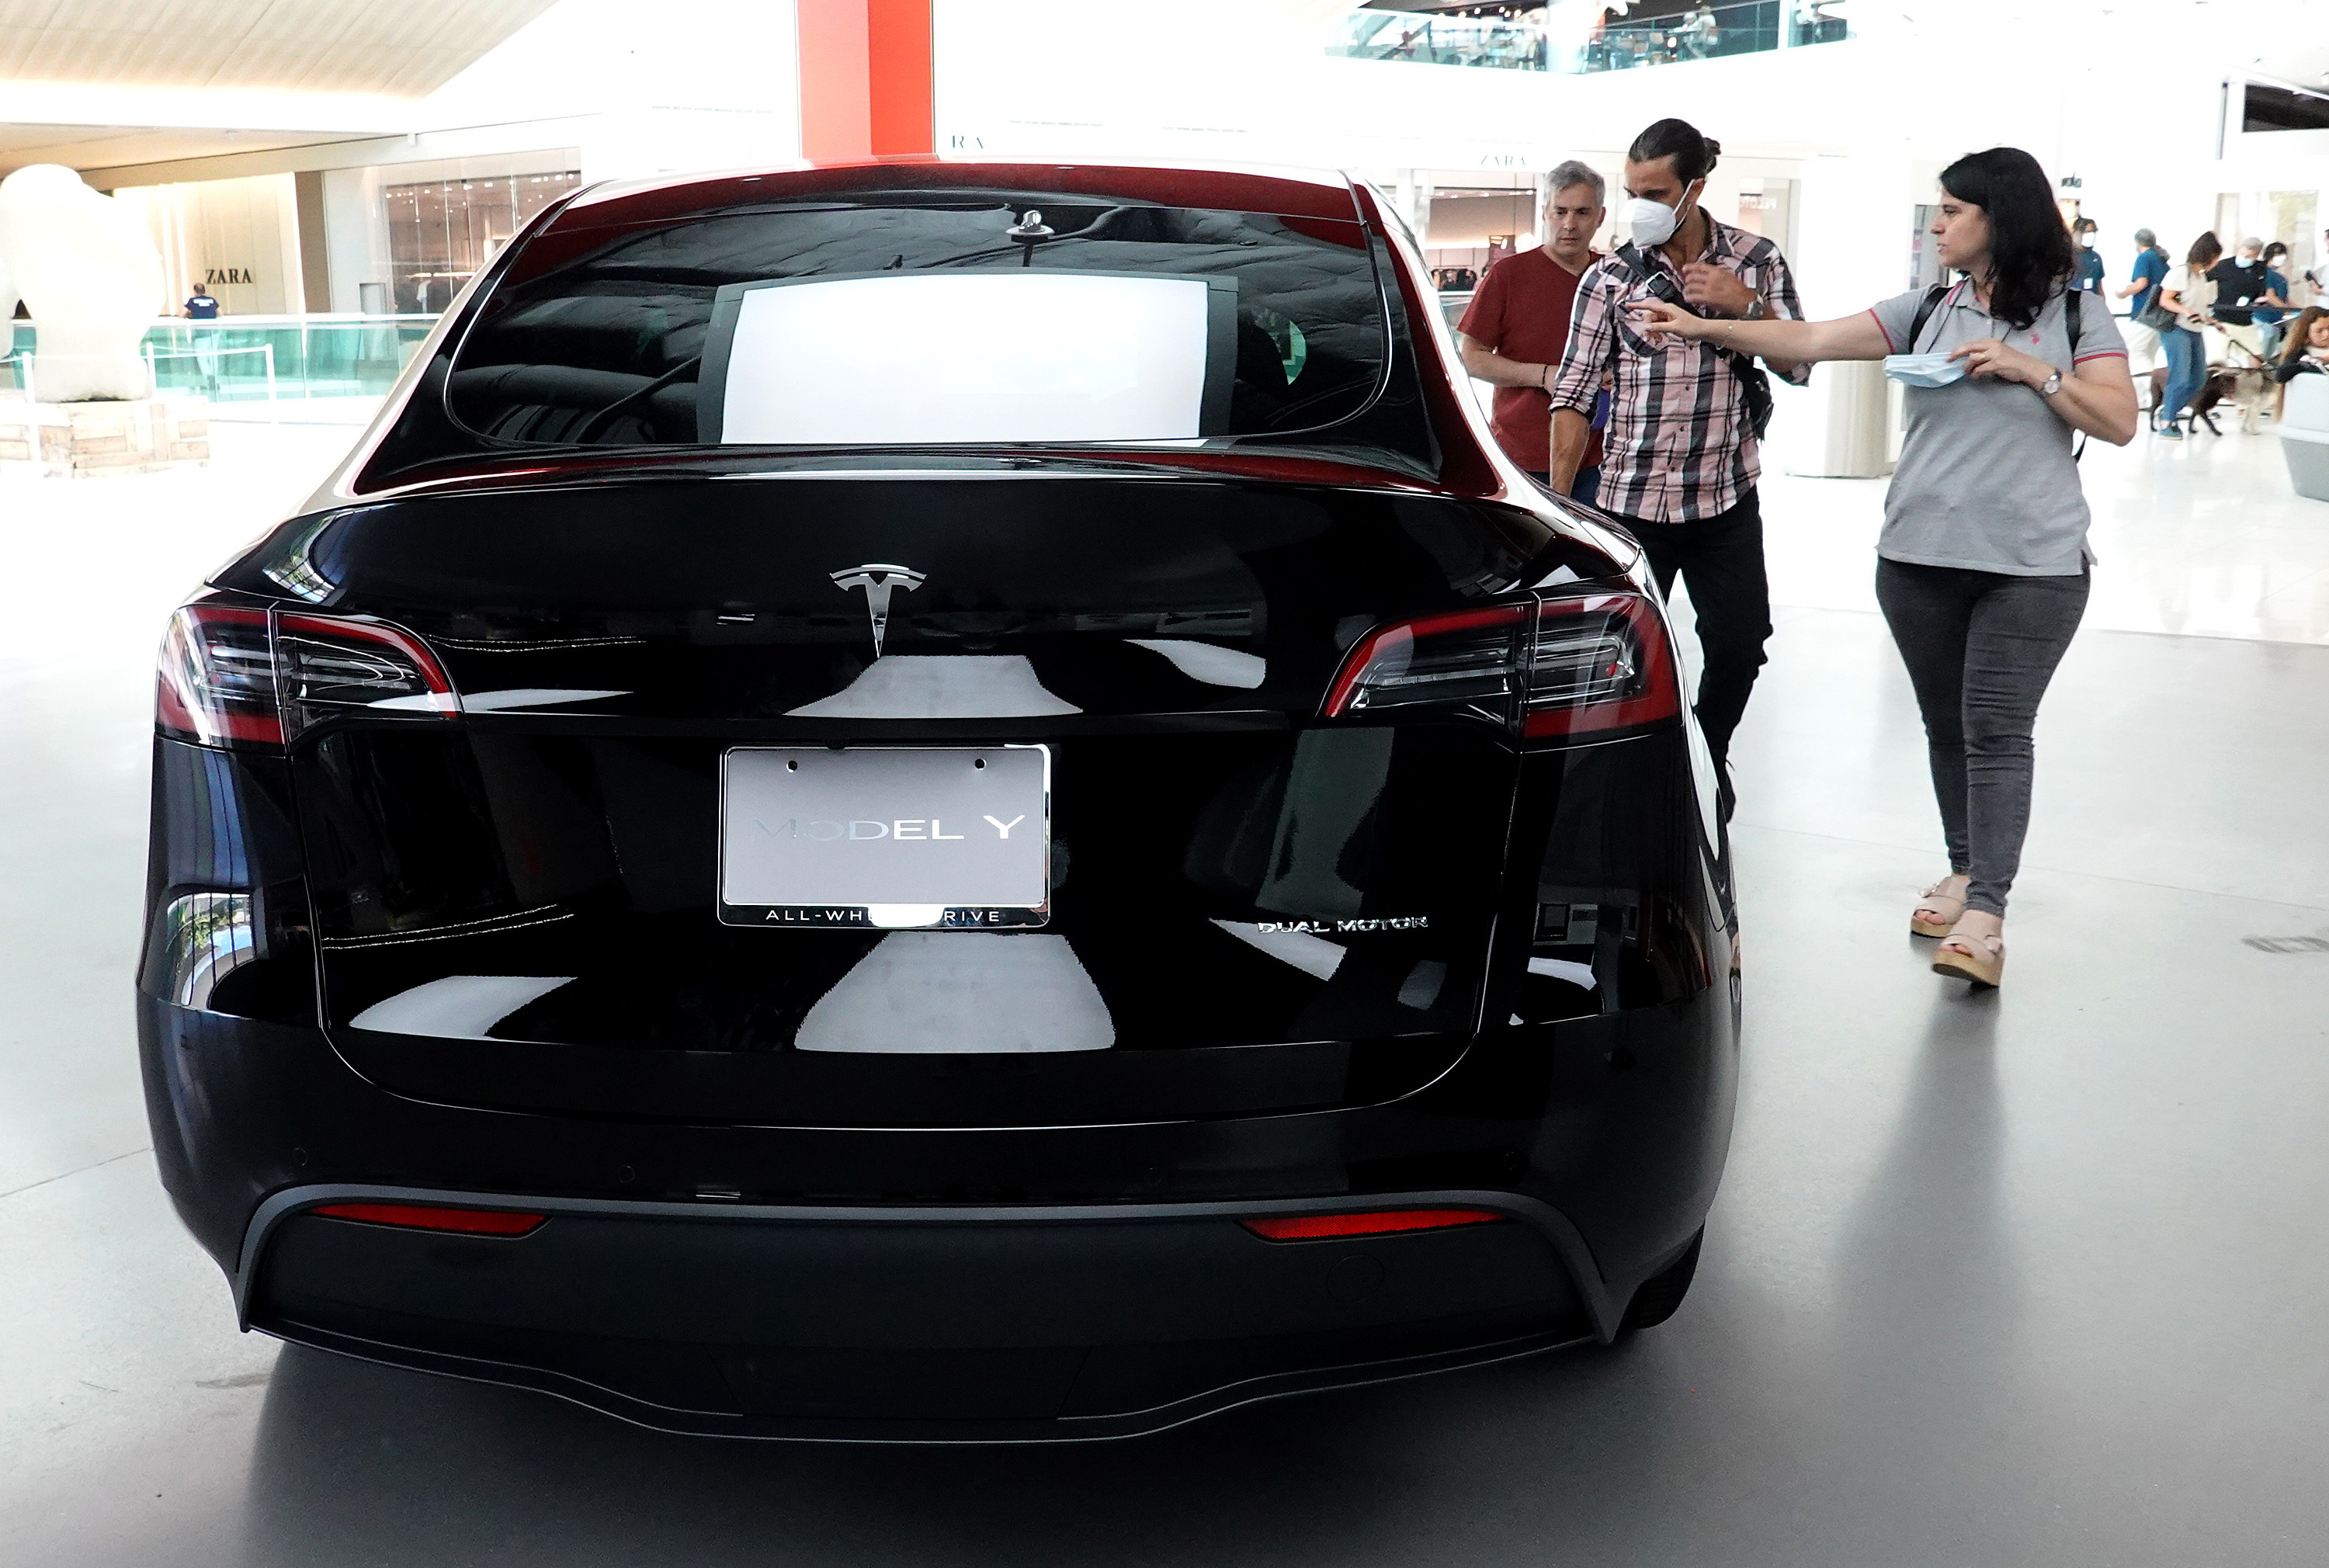 People inspect a Tesla Model Y electric vehicle in a showroom.